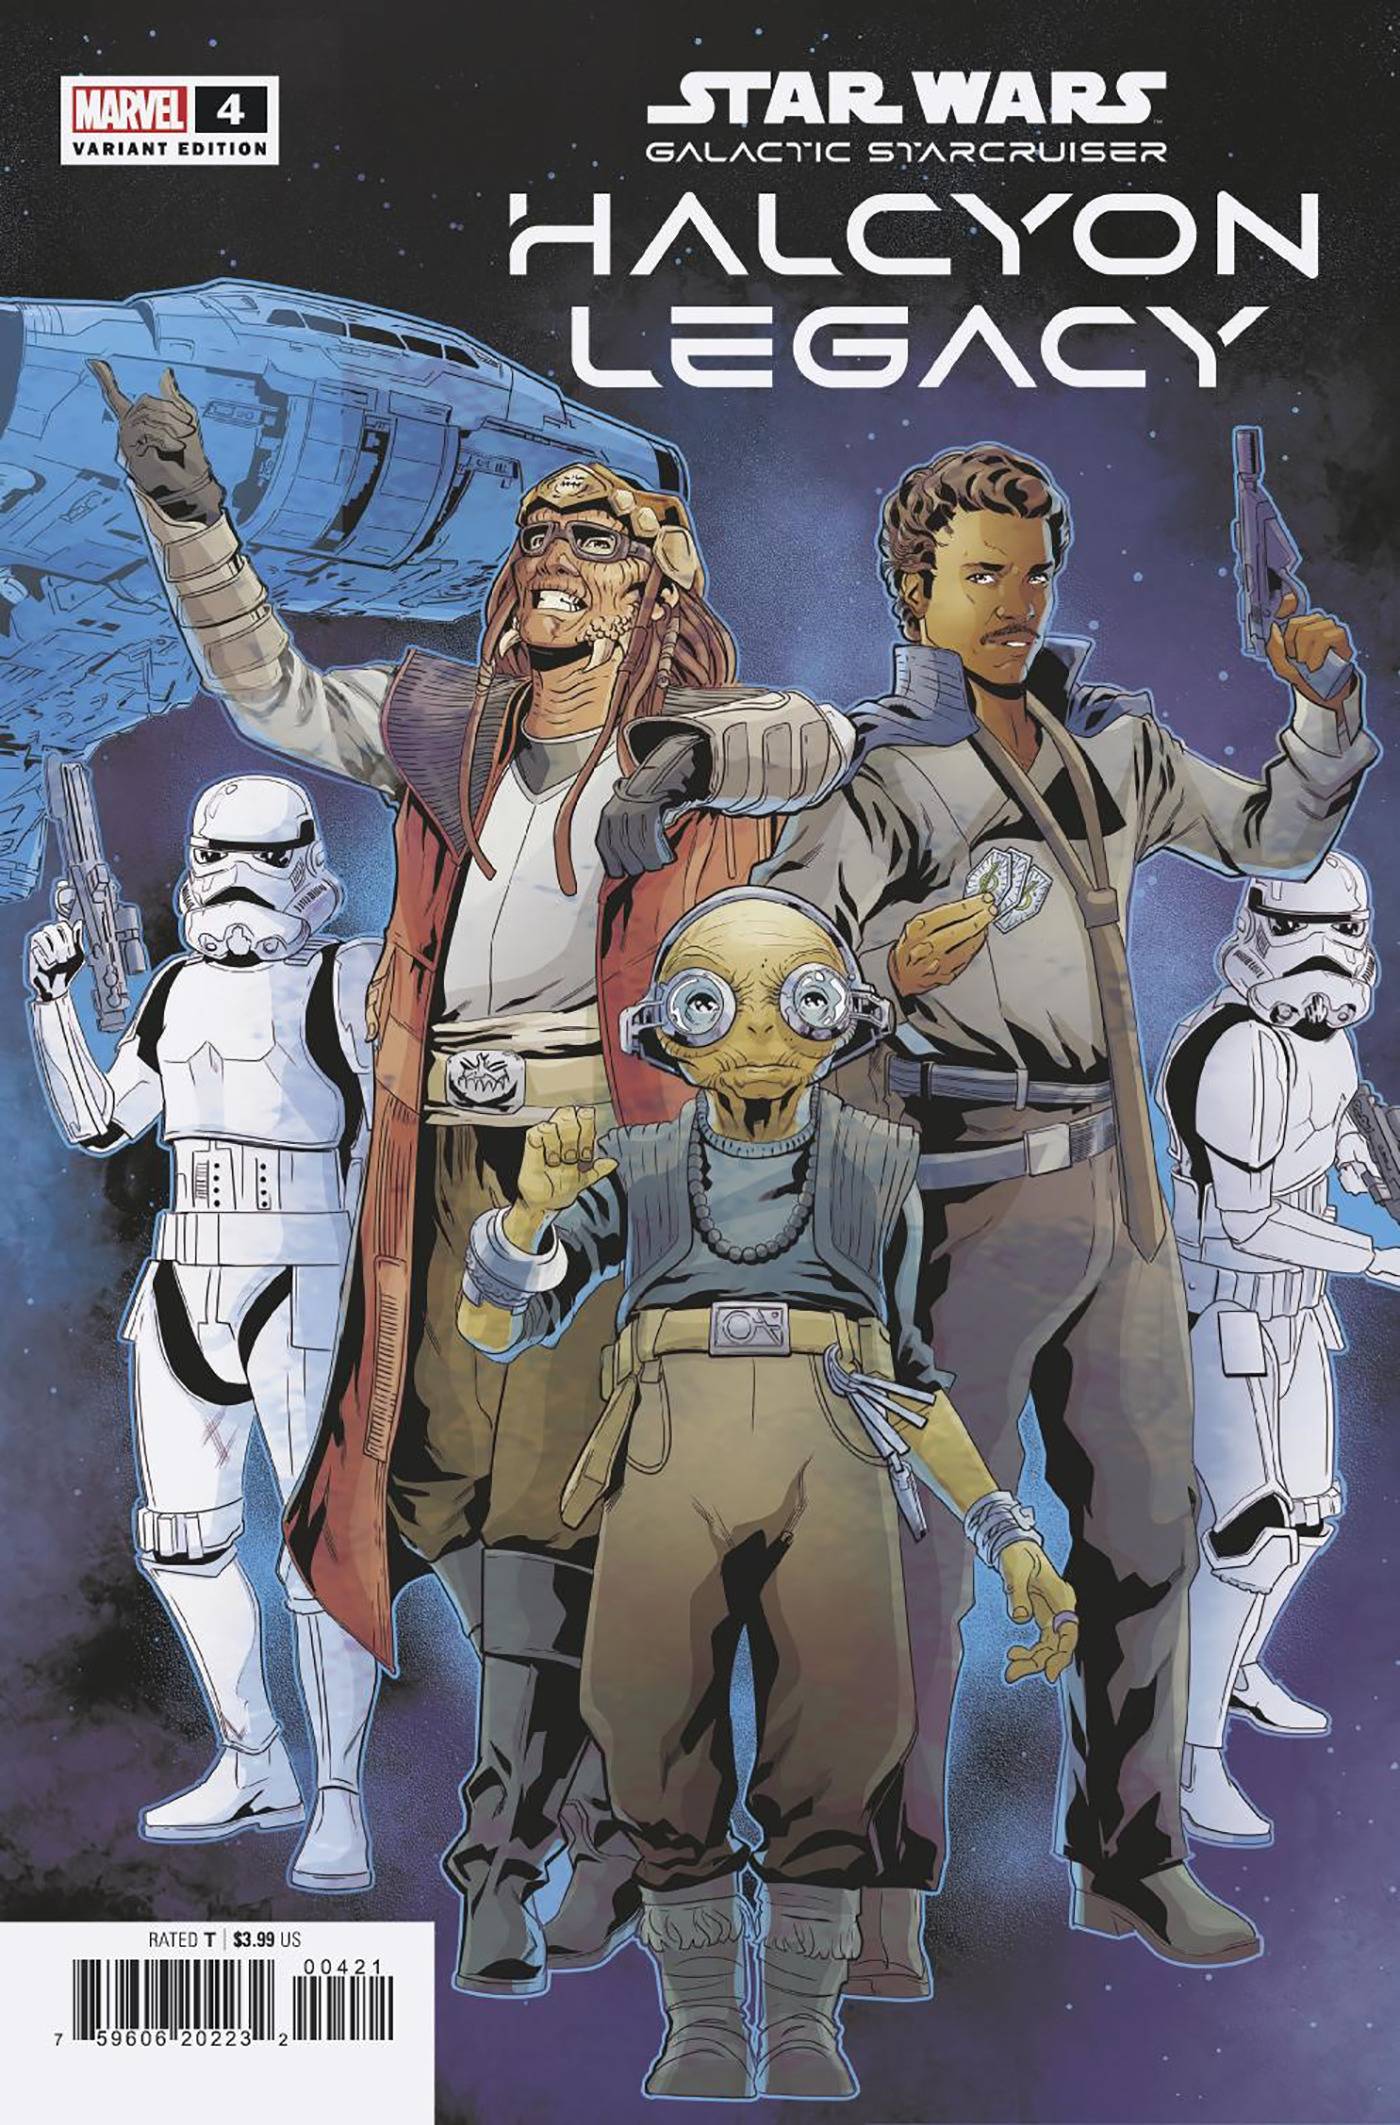 07/06/2022 STAR WARS HALCYON LEGACY #4 (OF 5) SLINEY CONNECTING VARIANT